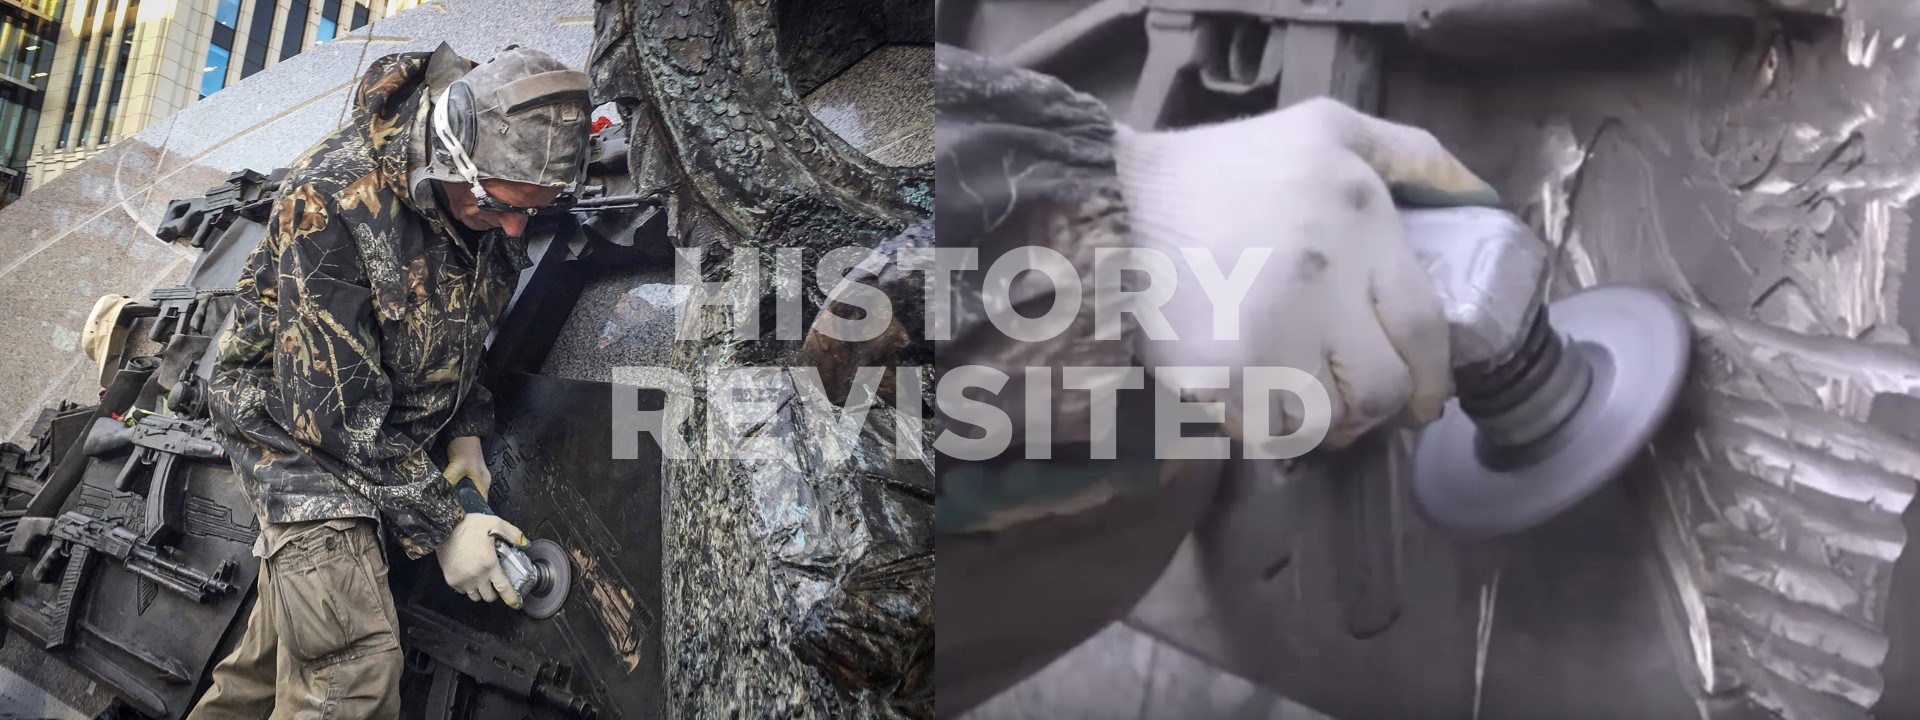 #HistoryRevisited: Monumental Controversy in Russia